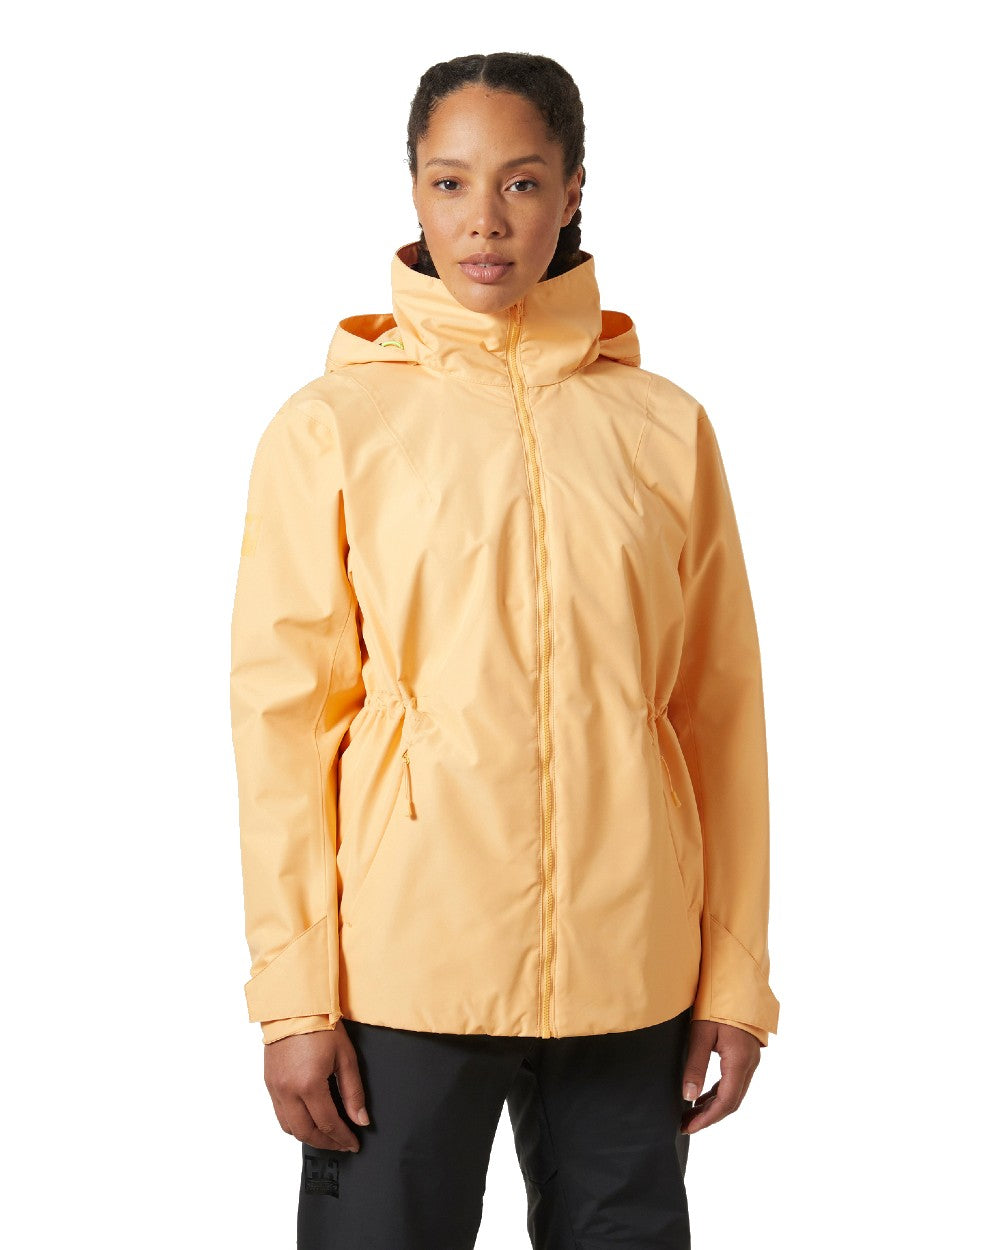 Miami Peach coloured Helly Hansen Womens HP Racing Sailing Jacket 2.0 on white background 